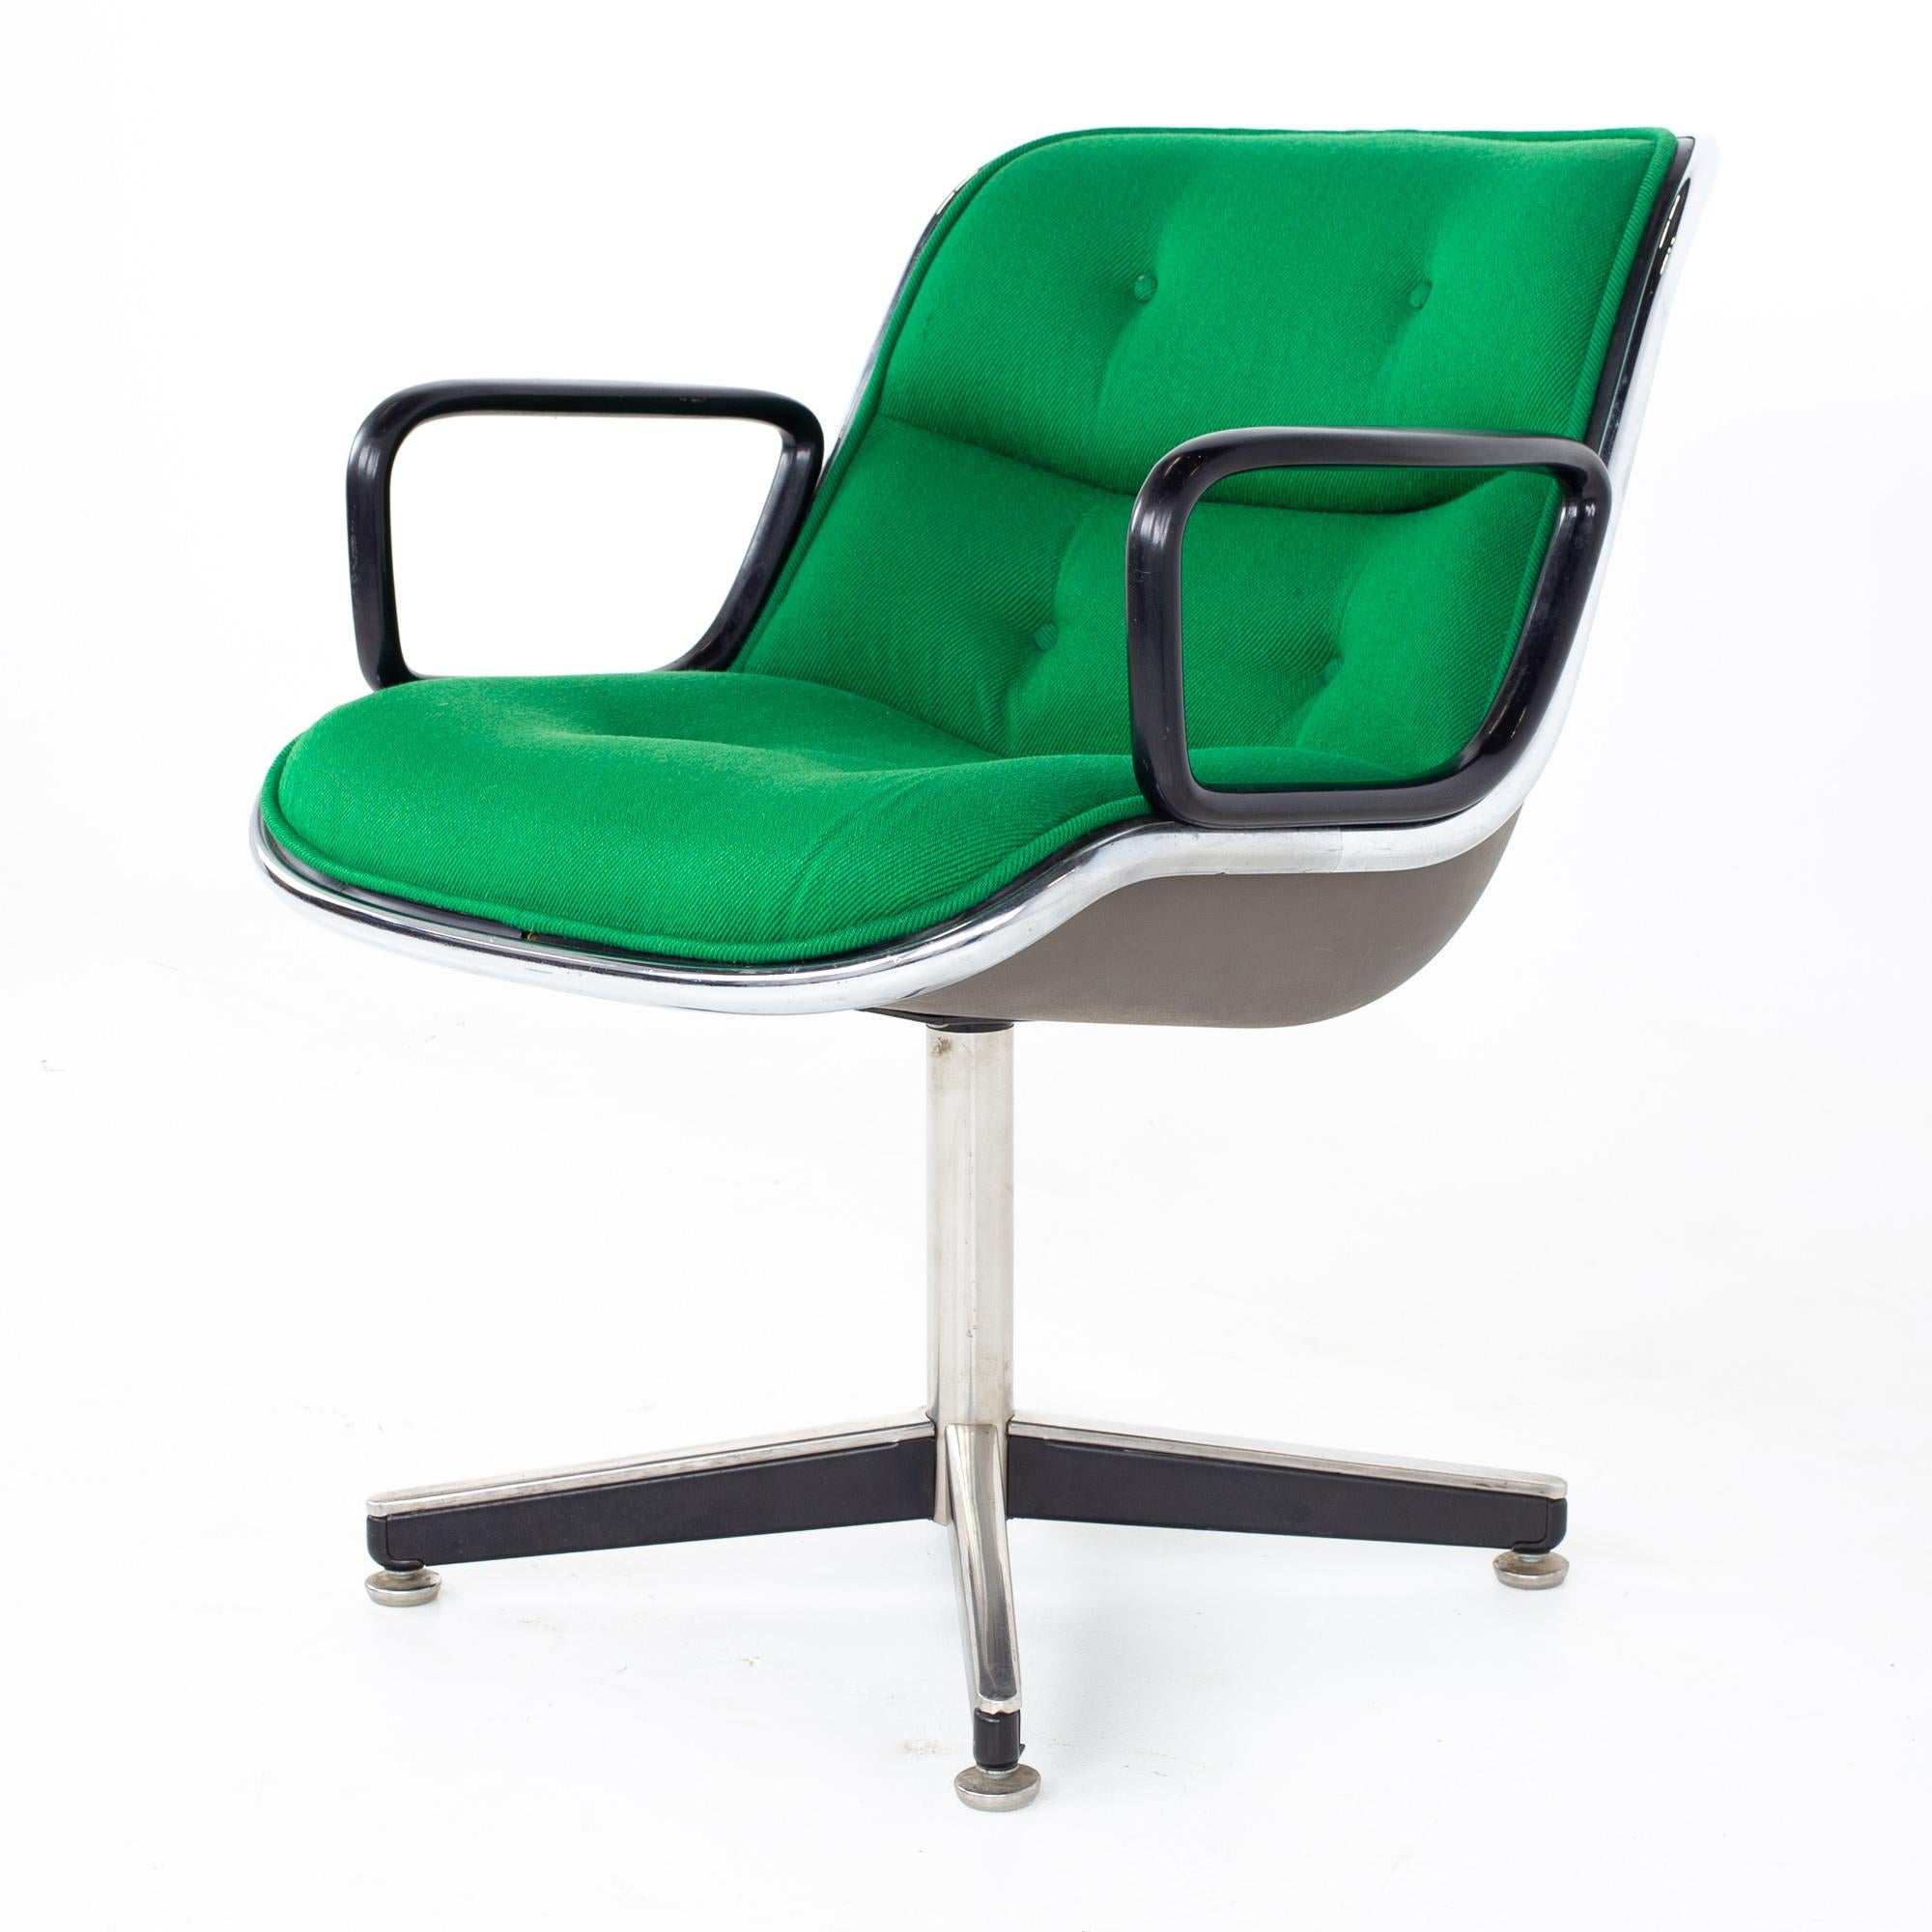 Early Charles Pollock for Knoll Mid Century green occasional office chair
Chair measures: 26.5 wide x 27 deep x 31 high, with a seat height of 18 inches and arm height of 25.5 wide 

All pieces of furniture can be had in what we call restored